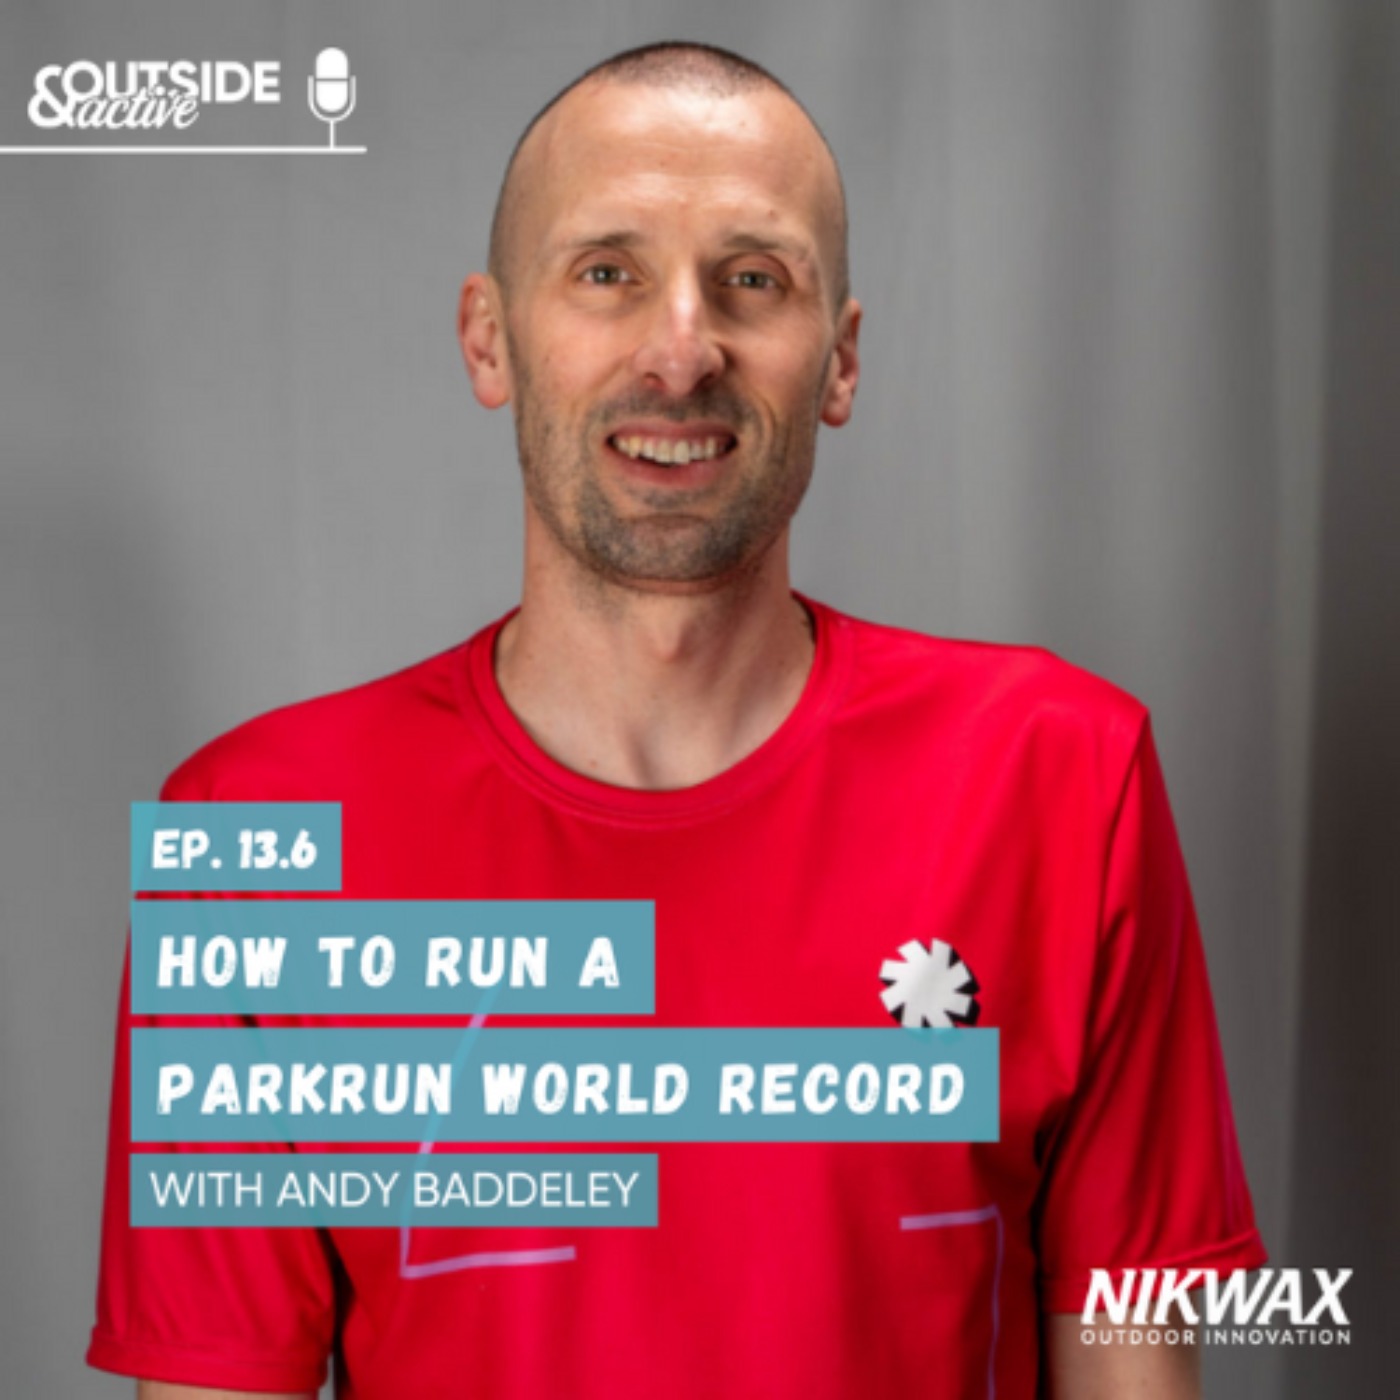 Andy Baddeley - How to set a Parkrun world record